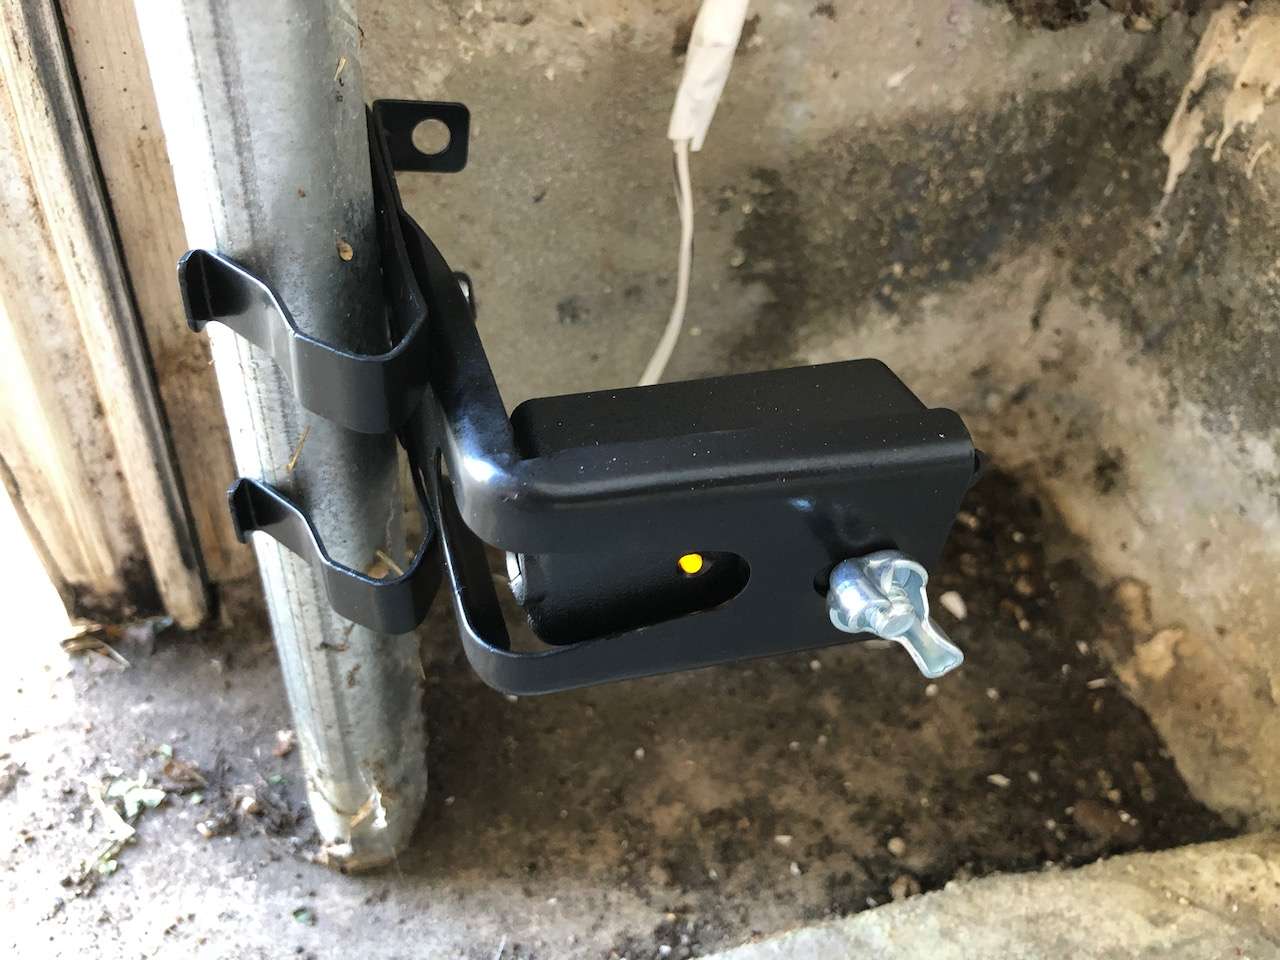 LiftMaster sensors mounted to garage door vertical tracks. If the tracks are too tight, the sensors can move as the door lowers causing it to reverse.